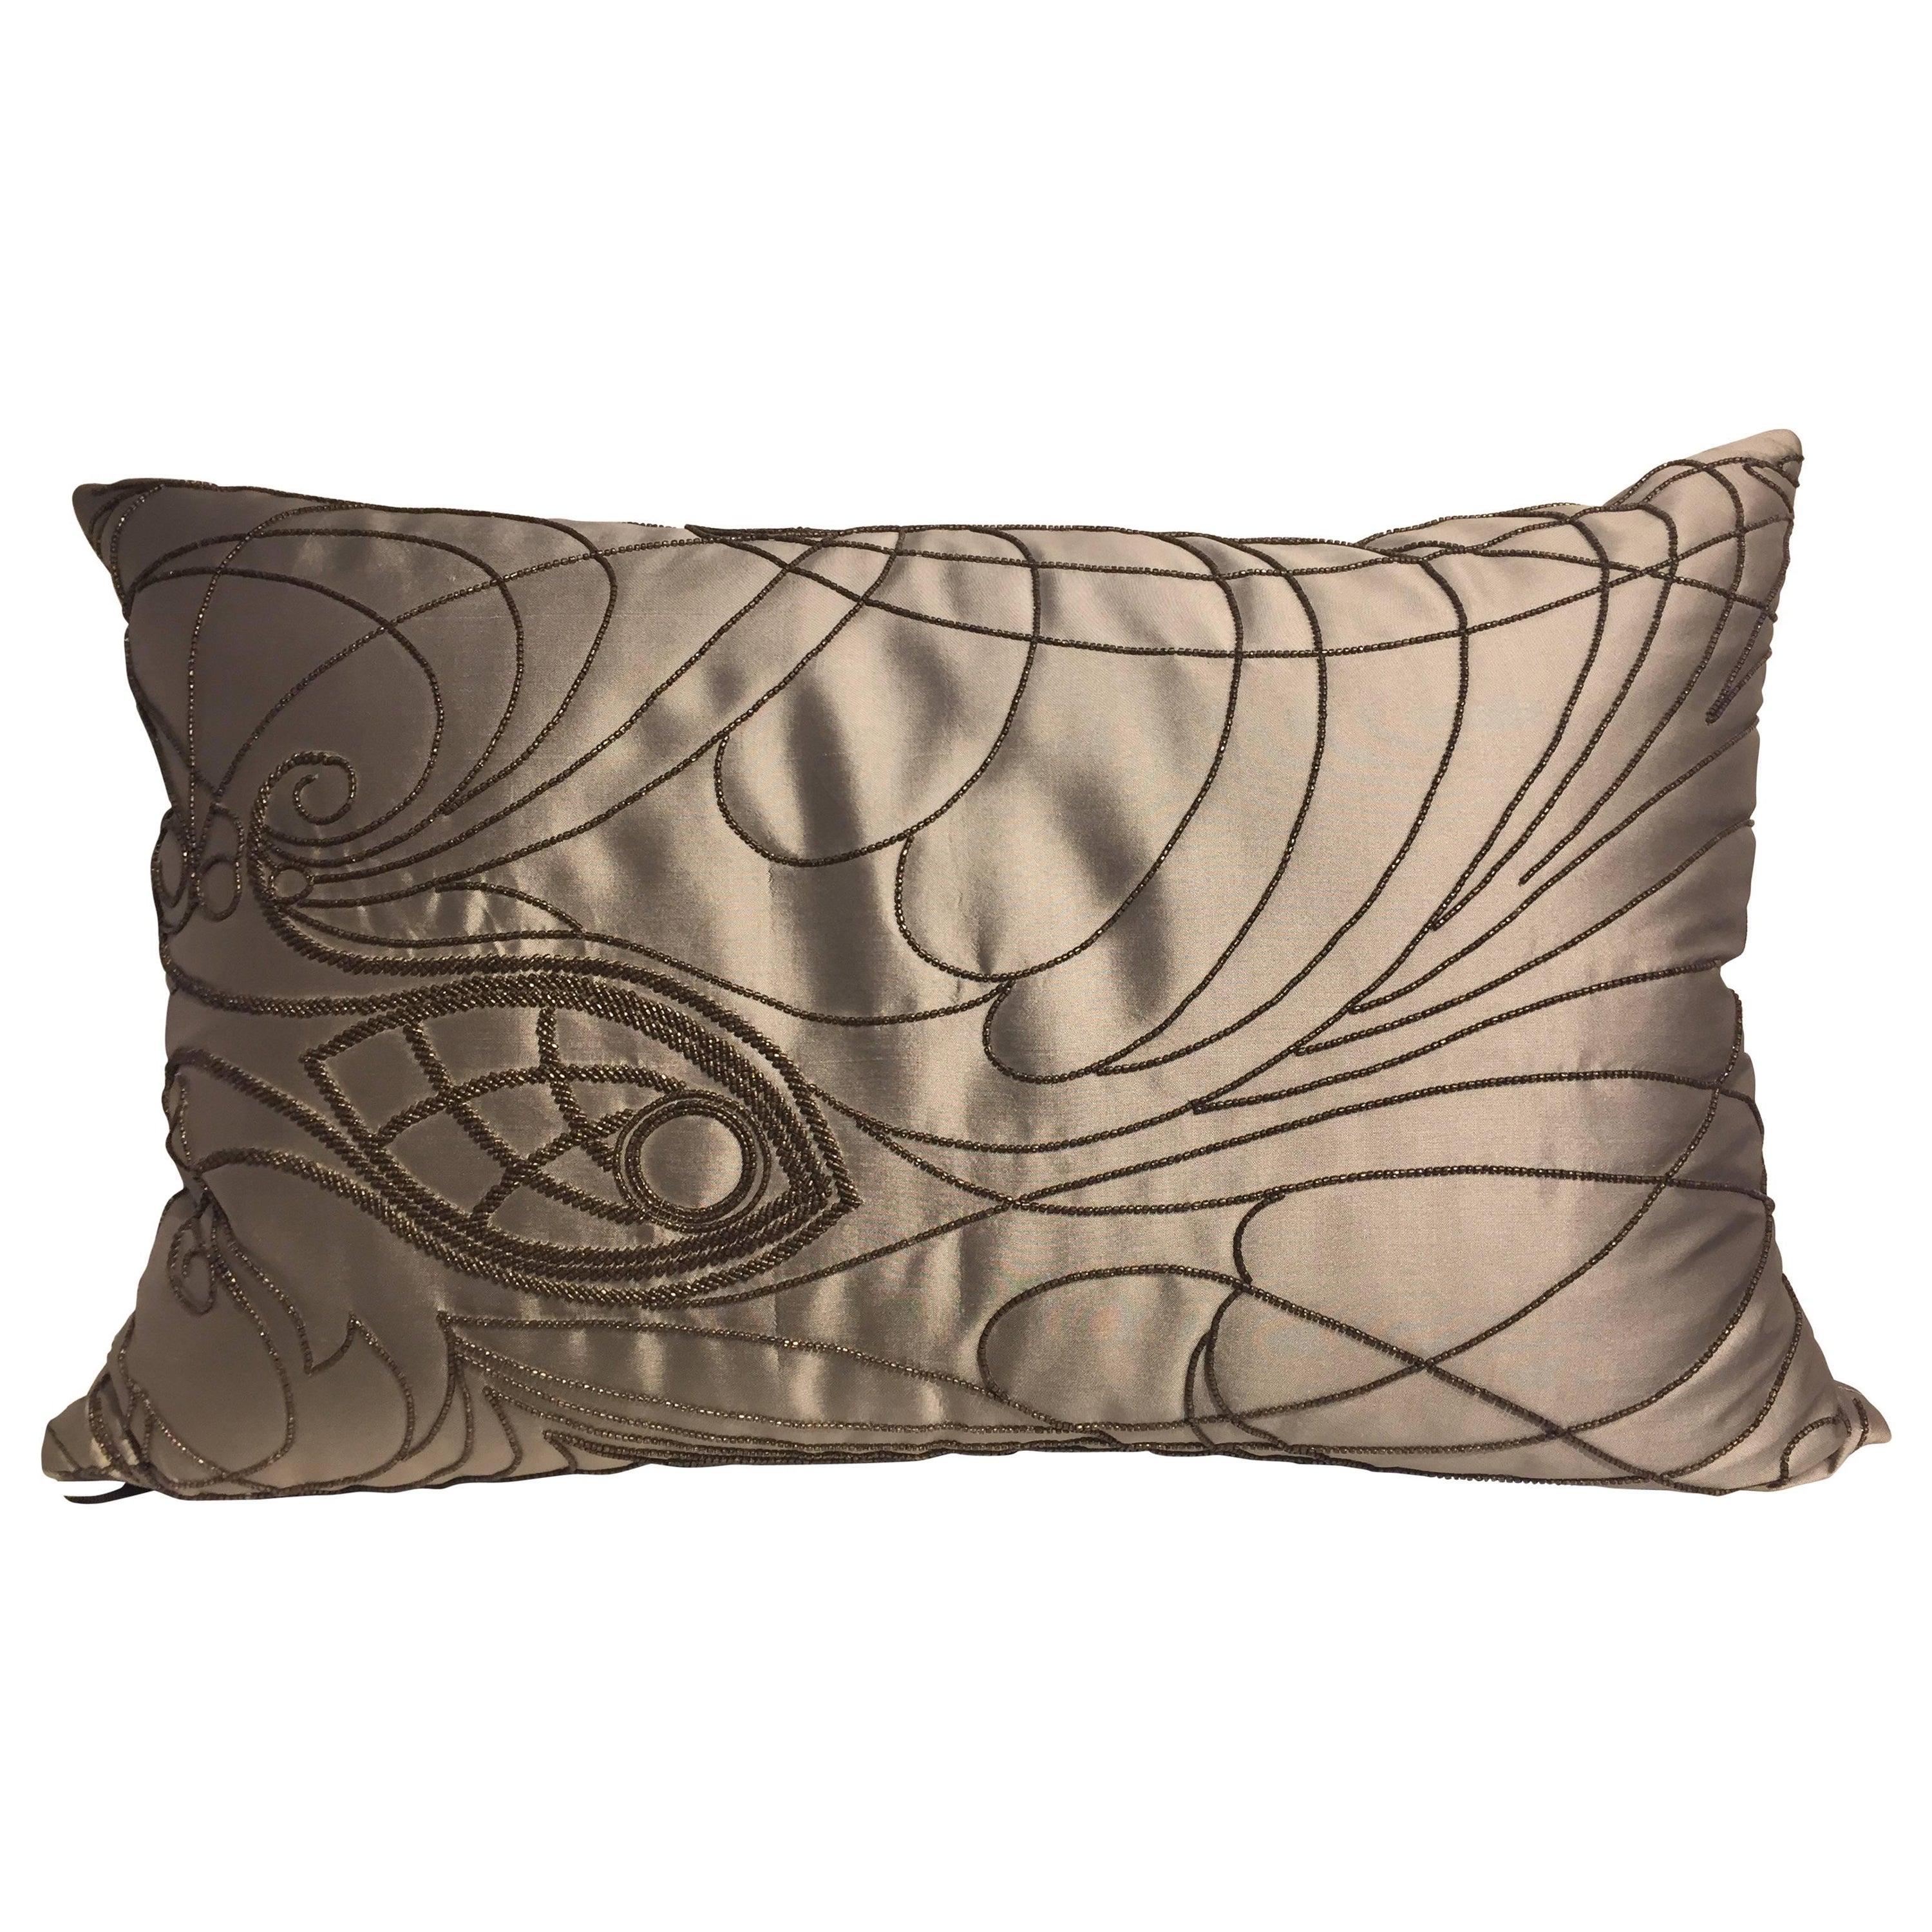 Decorative Silk Cushion with Hand Embroidery Beading Col. Silver For Sale